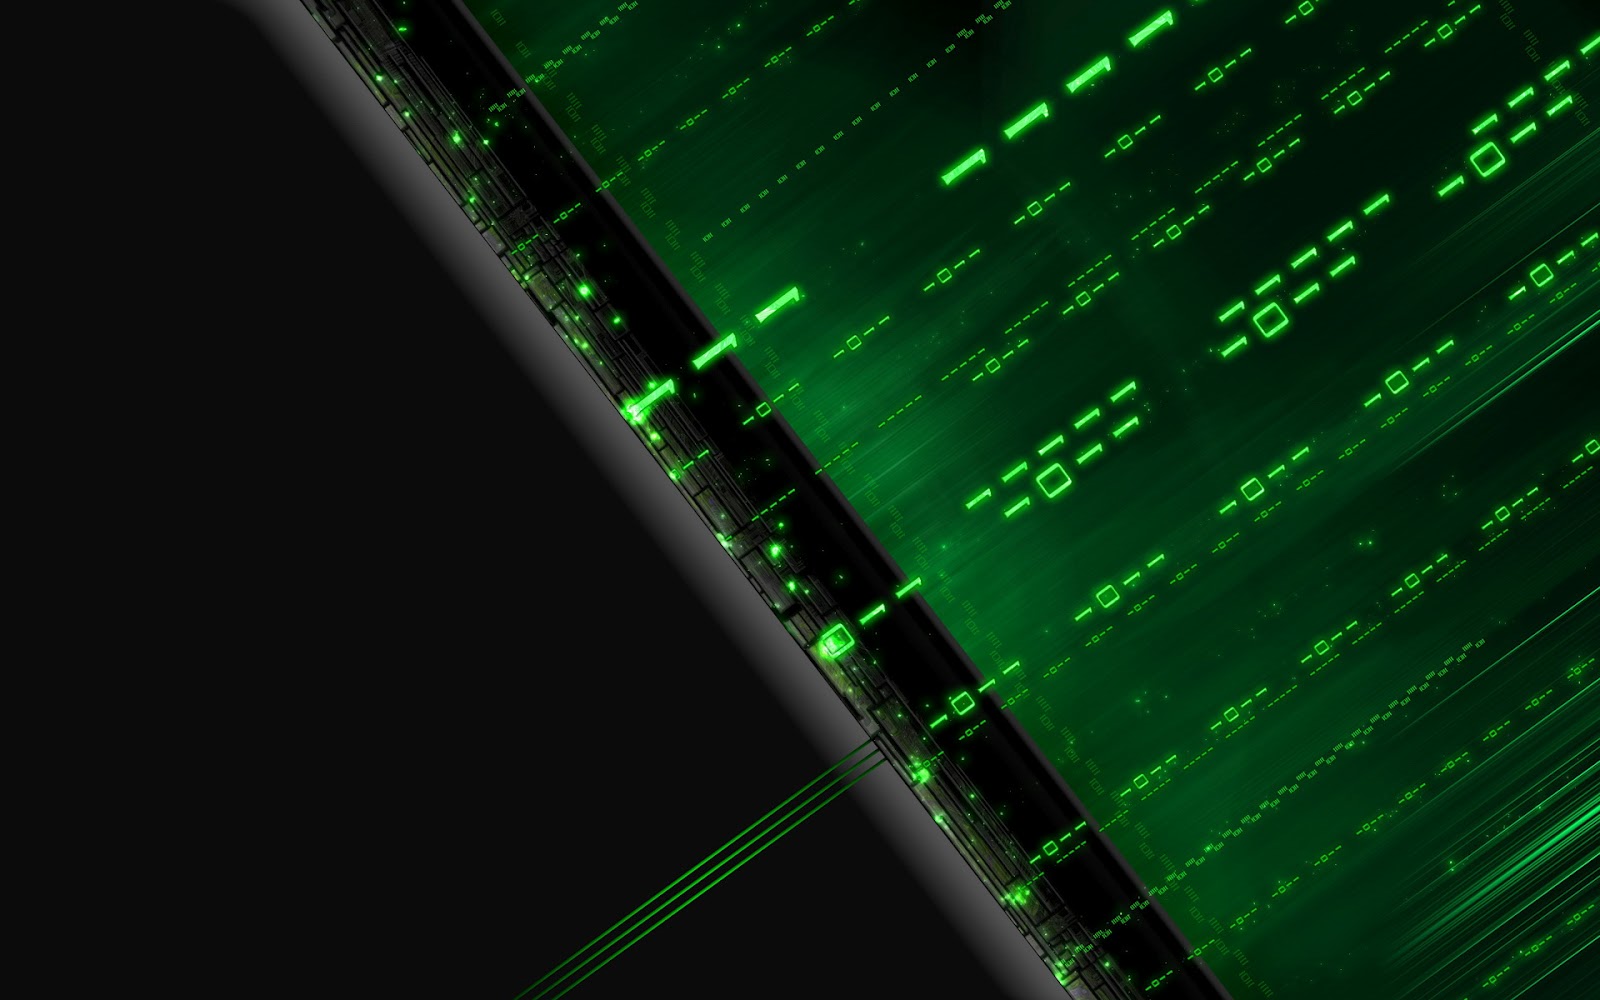 Binary code by The Matrix wallpaper | Home of Wallpapers | Free download hd  wallpapers